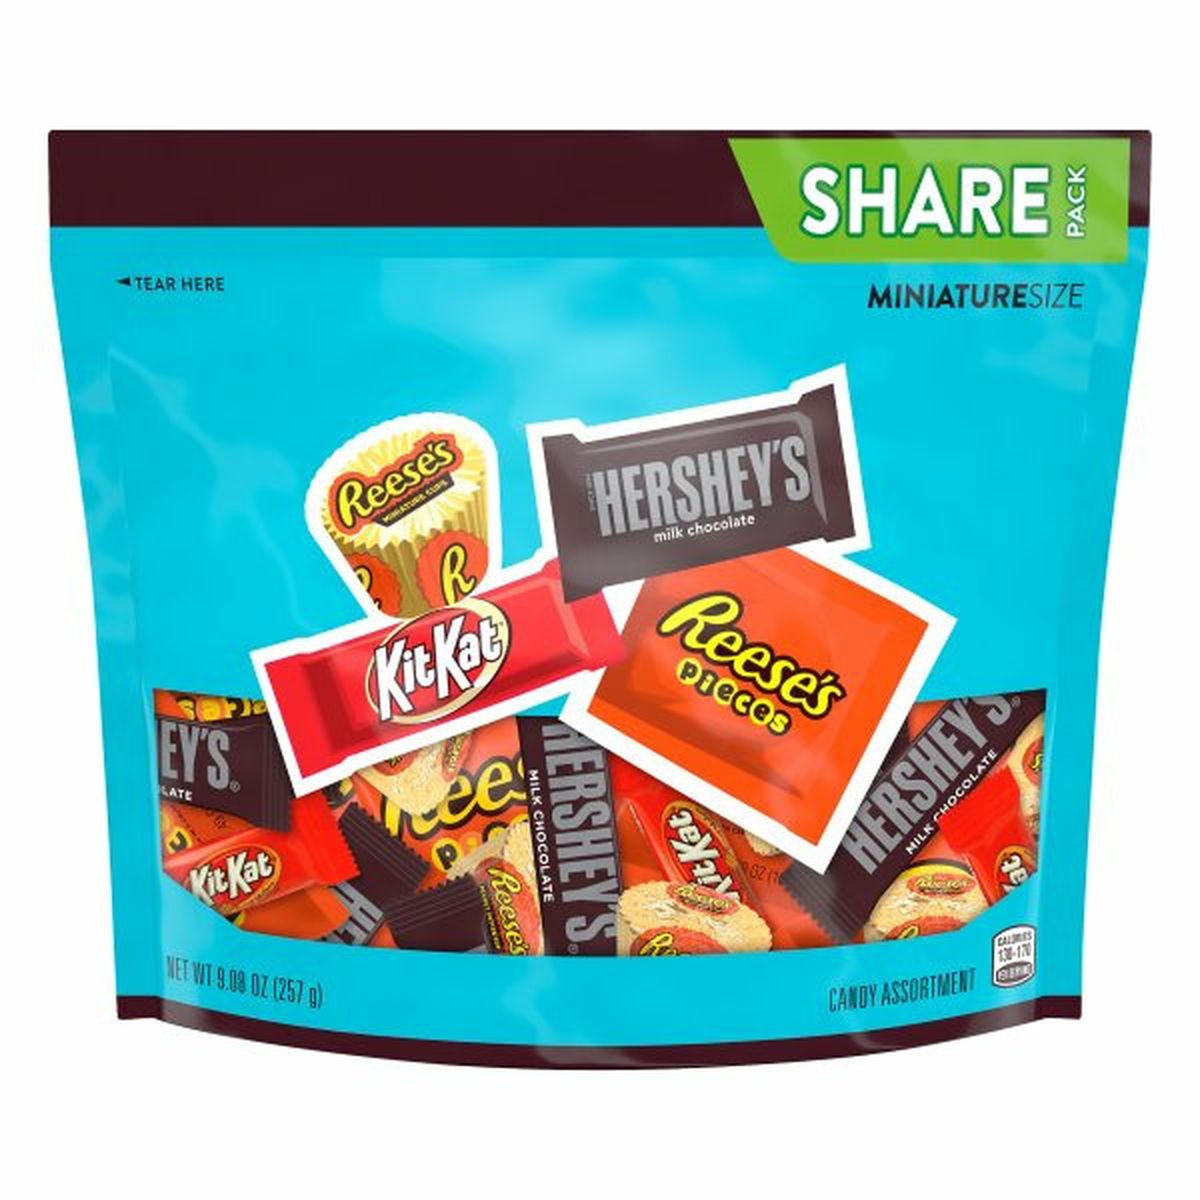 Calories in Hershey's Candy Assortment, Miniature Size, Share Pack